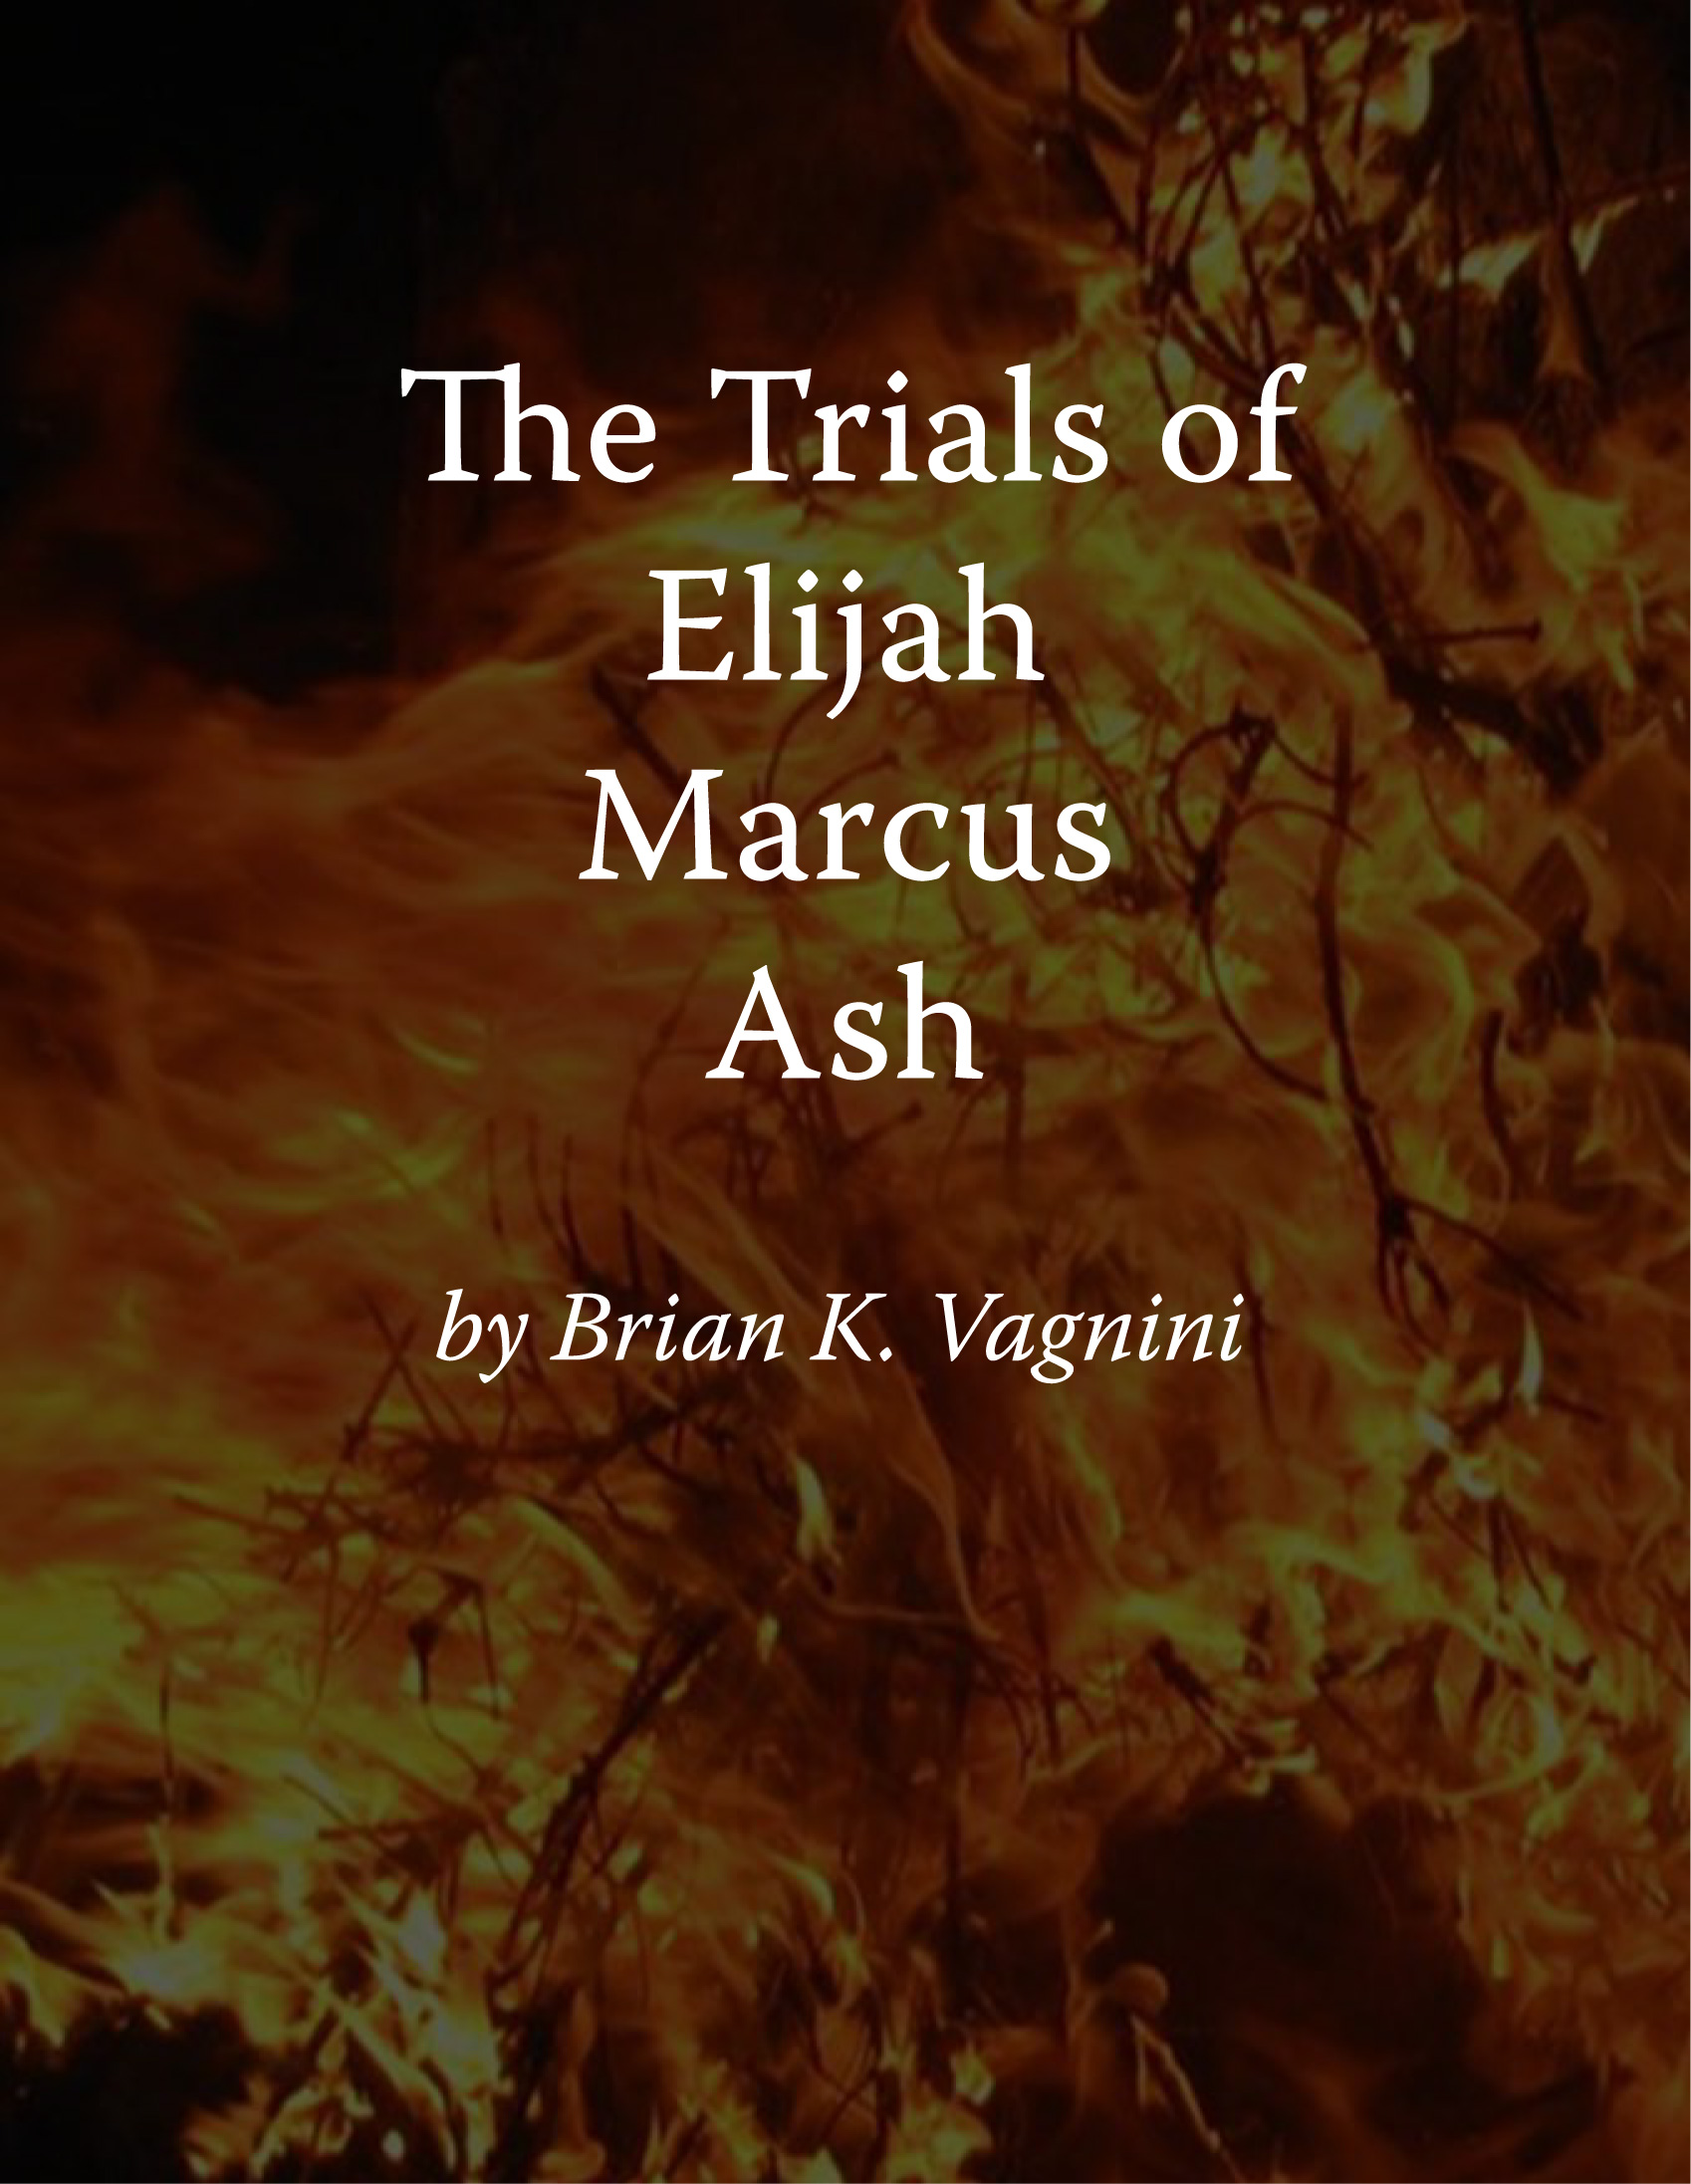 Cover of The Trials of Elijah Marcus Ash book, book 2